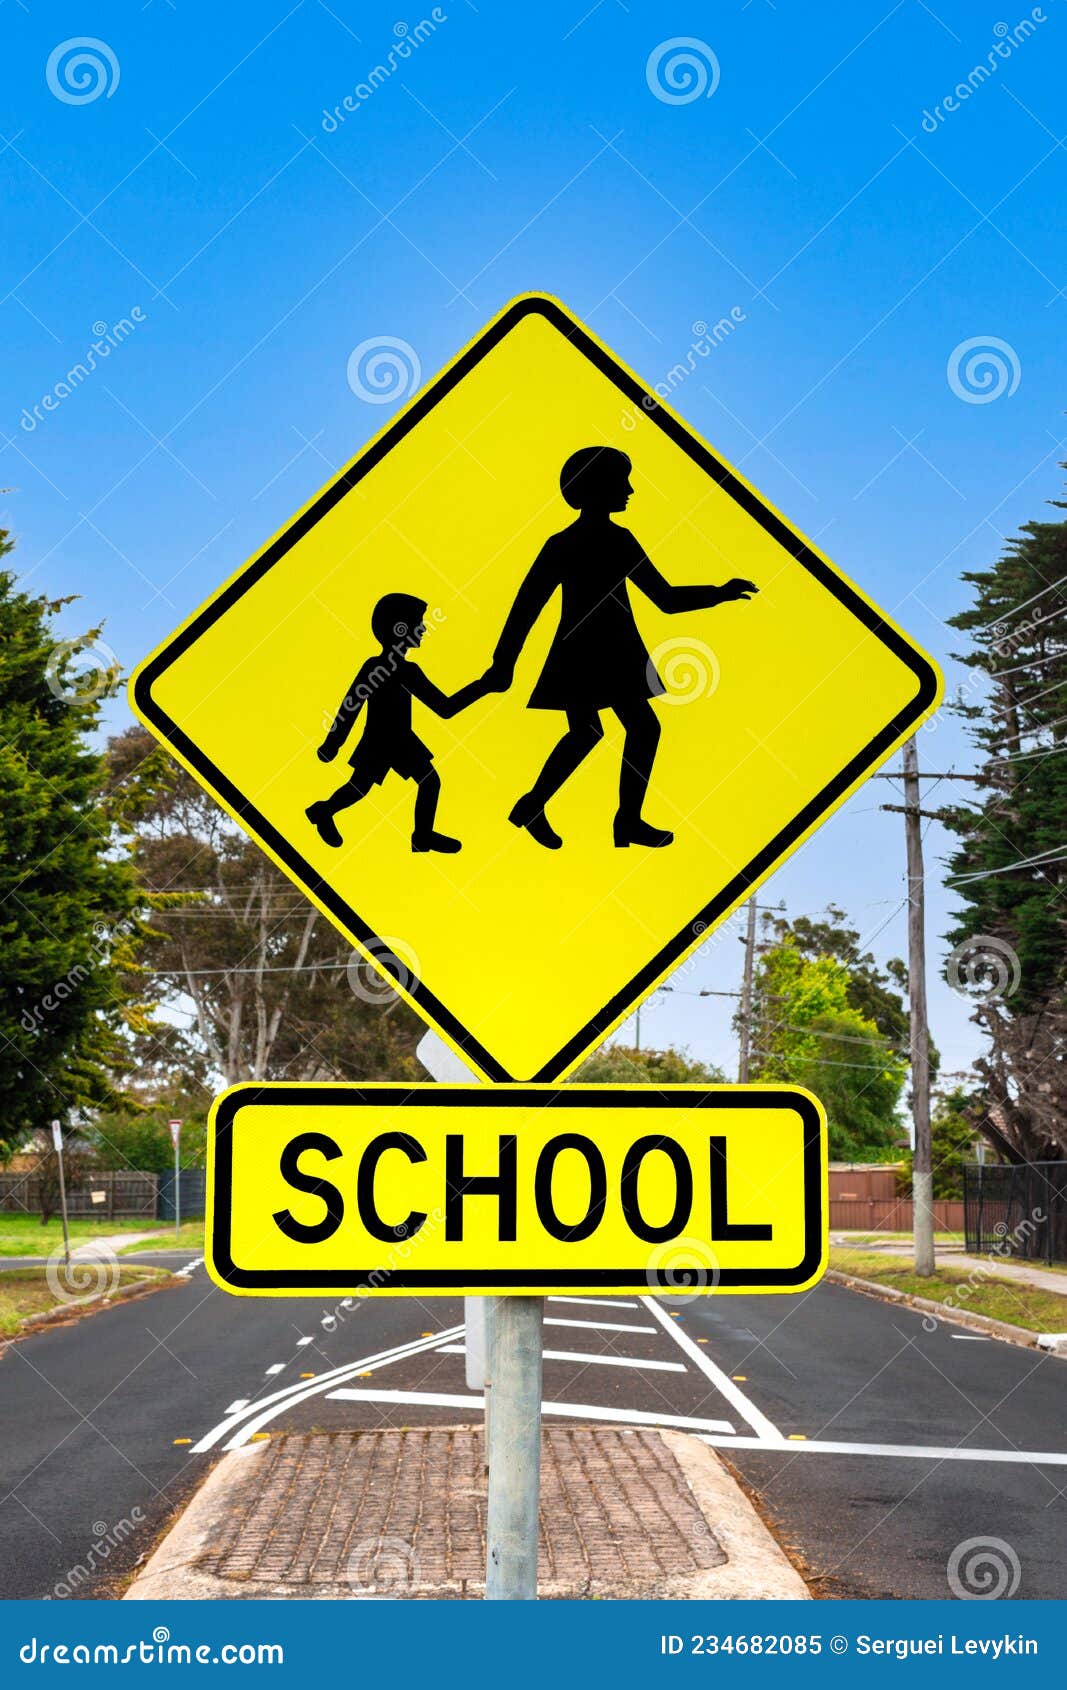 School Crossing Sign on the Street. Stock Image - Image of obey